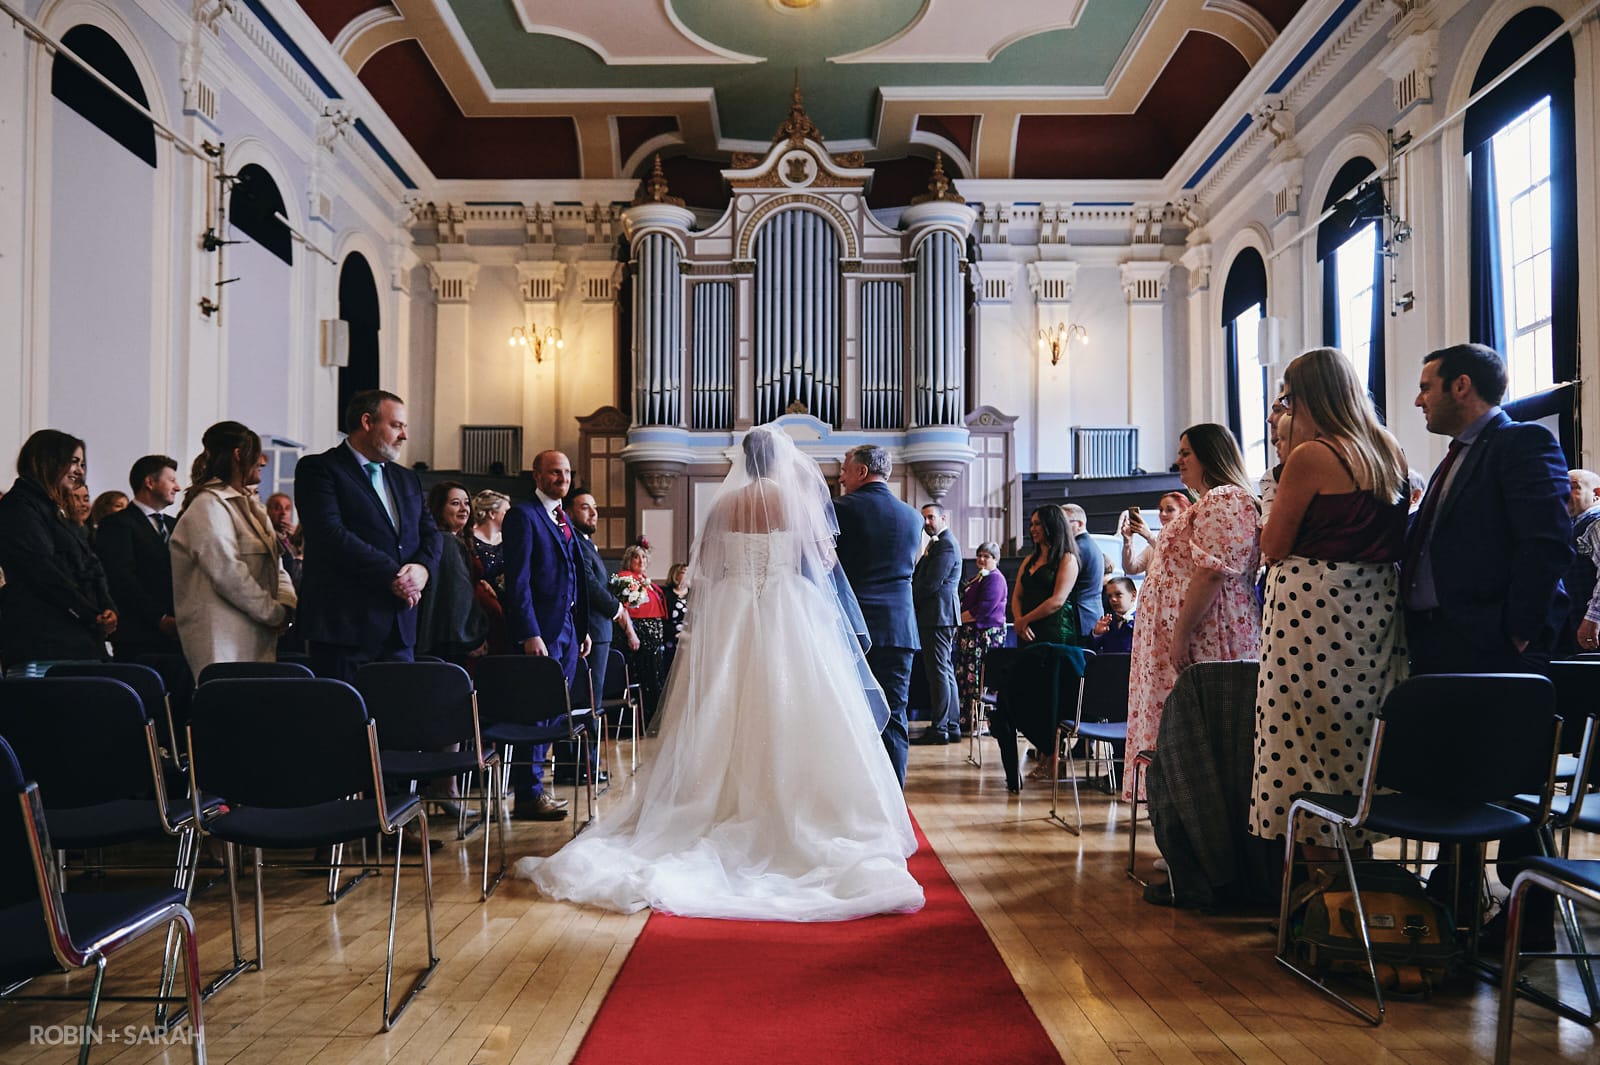 Bride and father walk up aisle for wedding ceremony at Kidderminster Town Hall